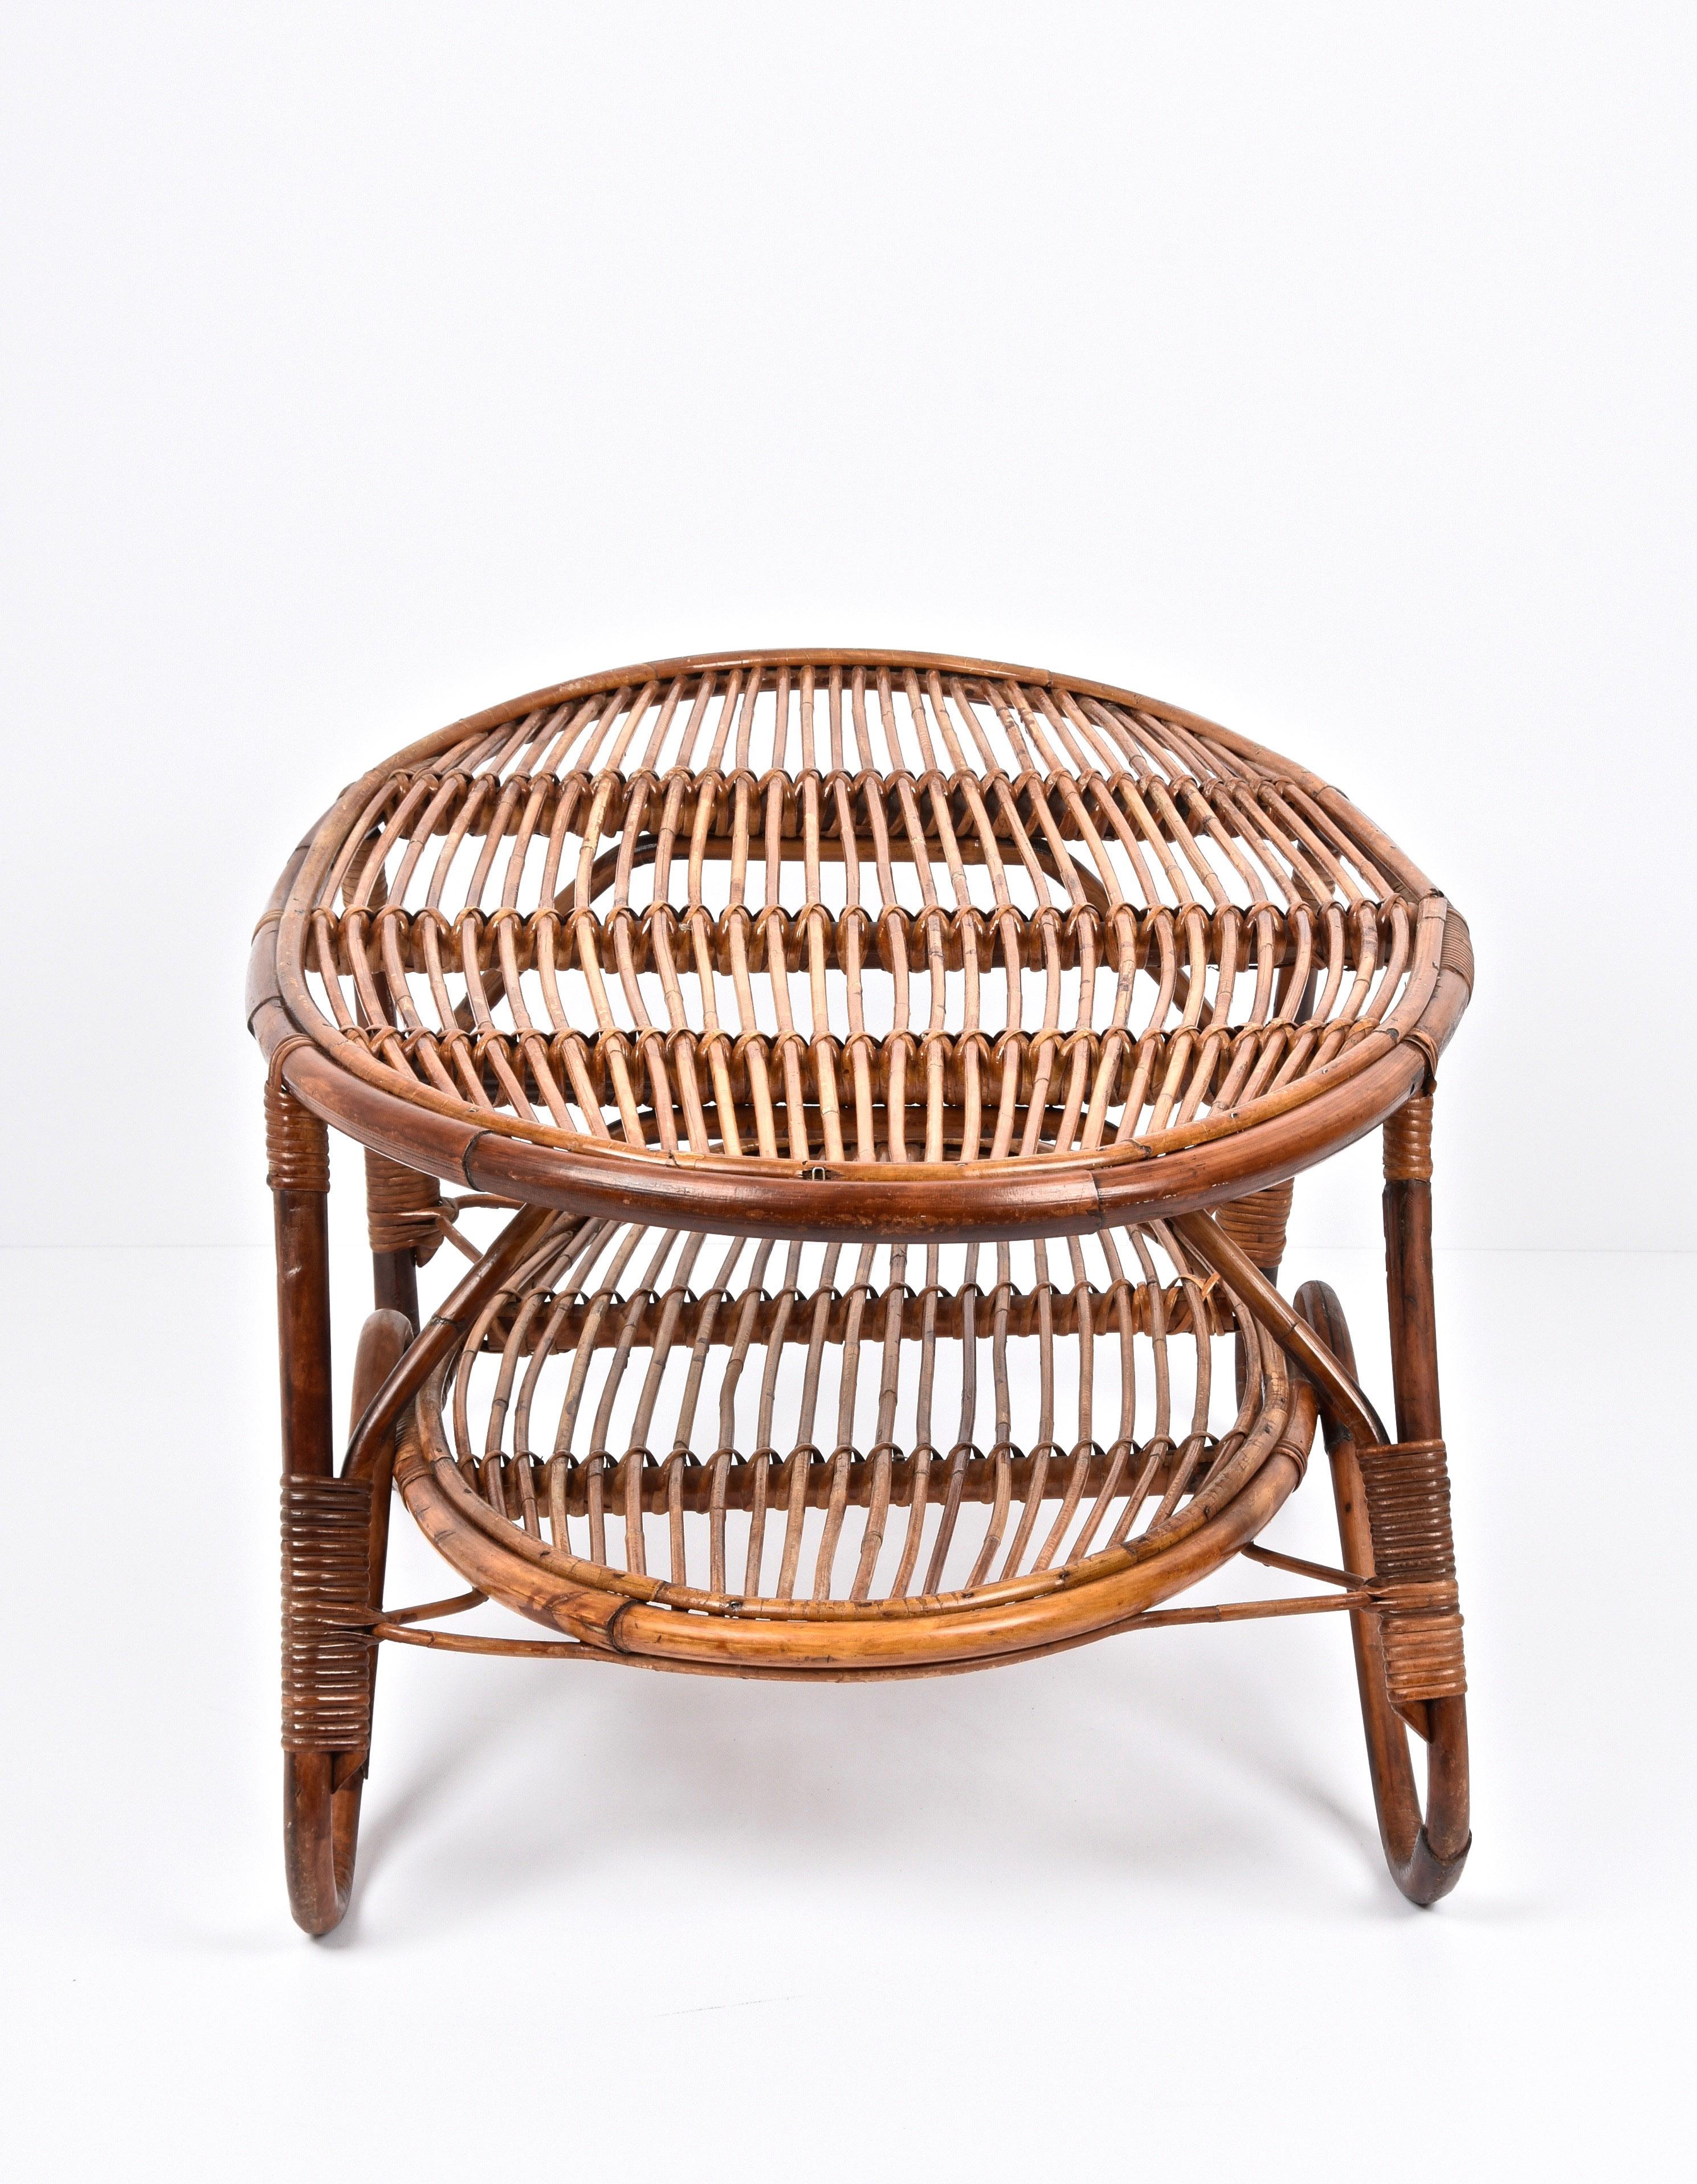 Incredible midcentury rattan & bamboo two-tier oval side table.

A wonderful coffee table with curved legs in bamboo and rattan, made in Italy during the 1950s.

This cocktail table is very useful and adaptable thanks to its design and its solid